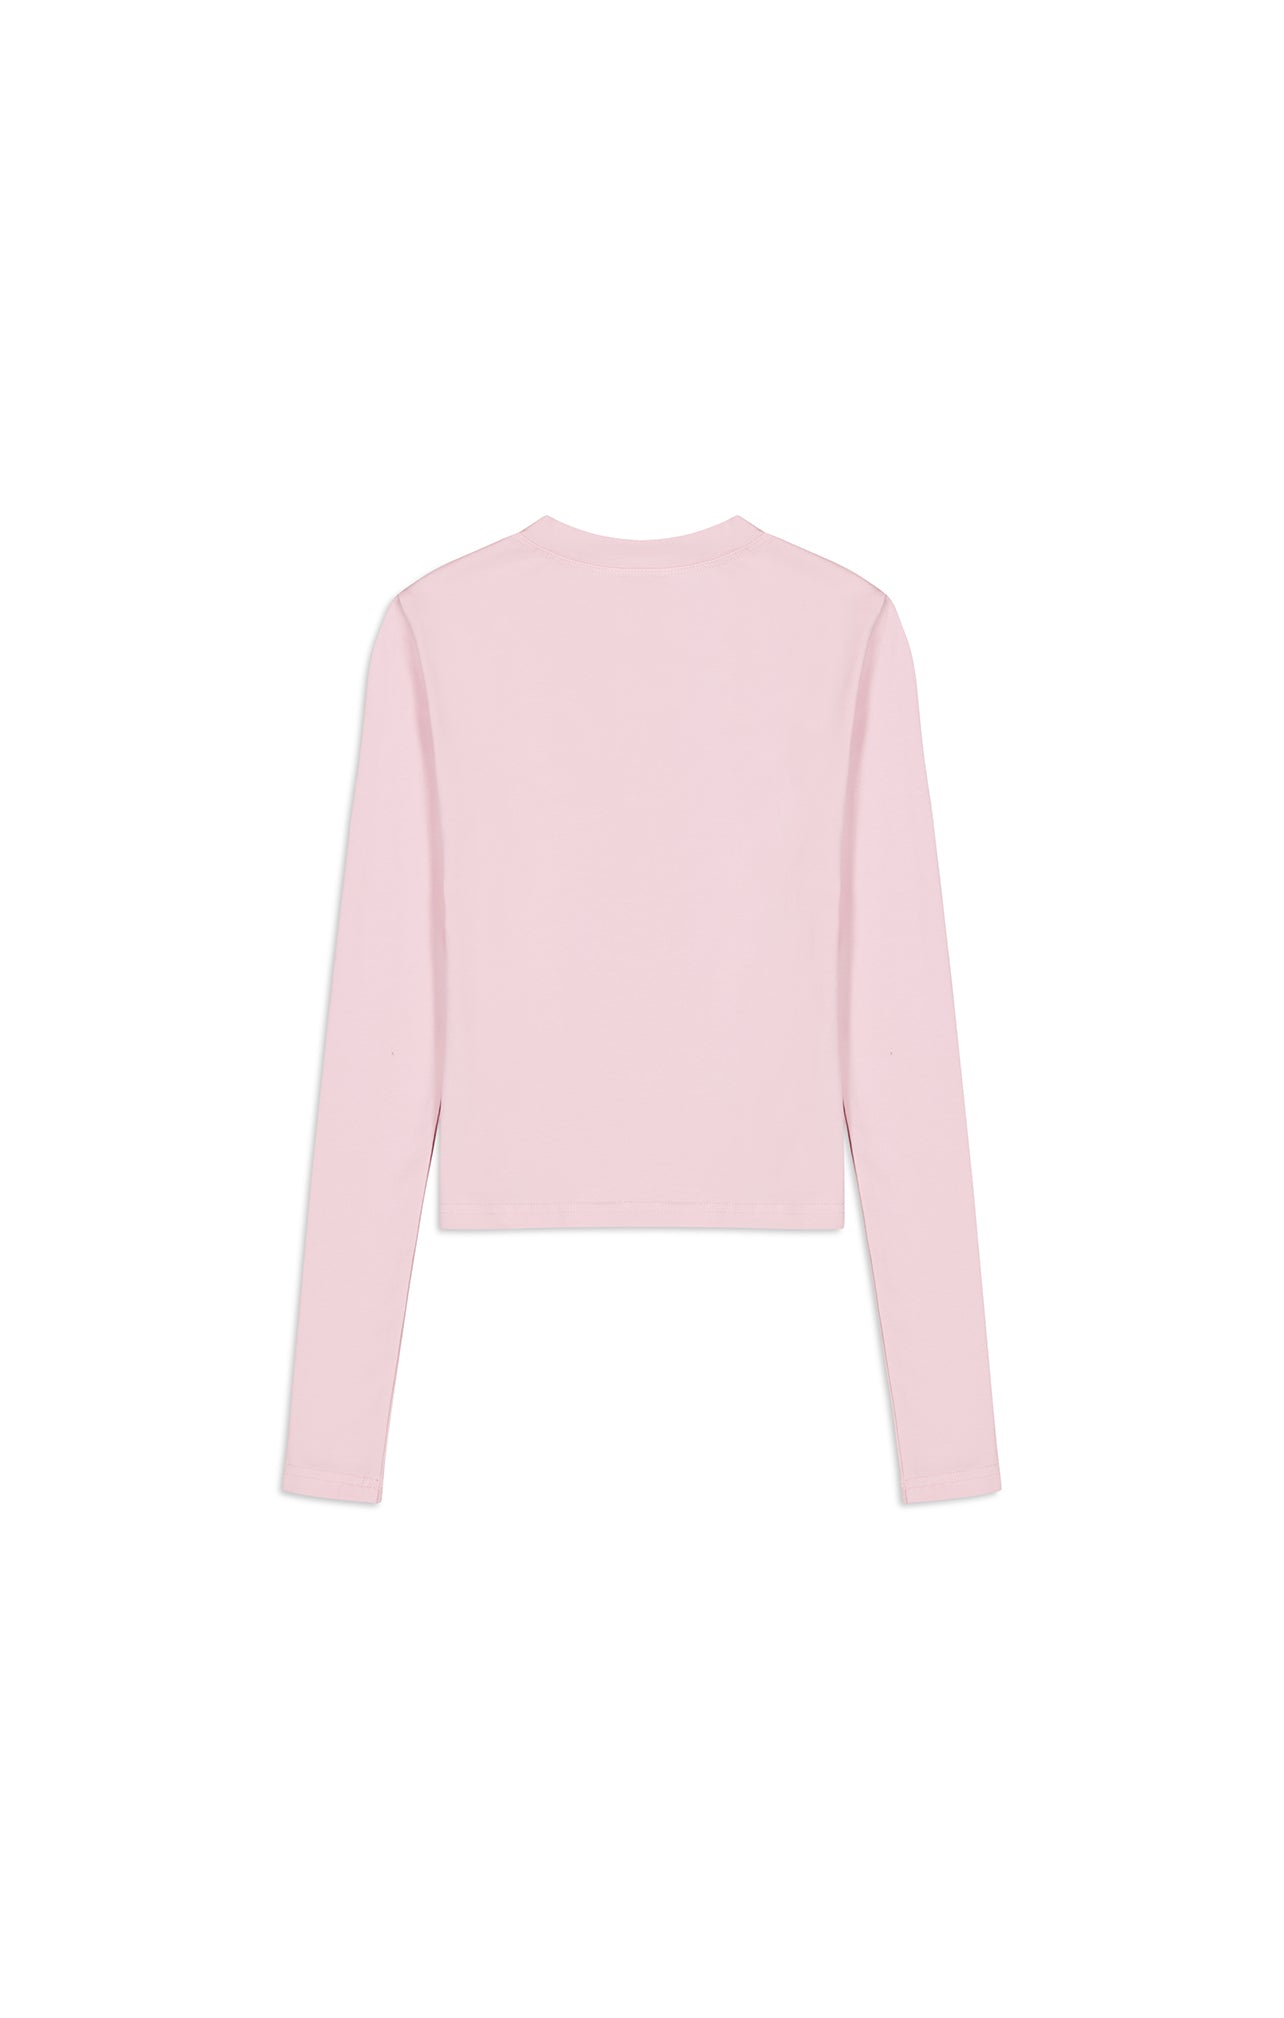 "COMPETE" TOP - Pink